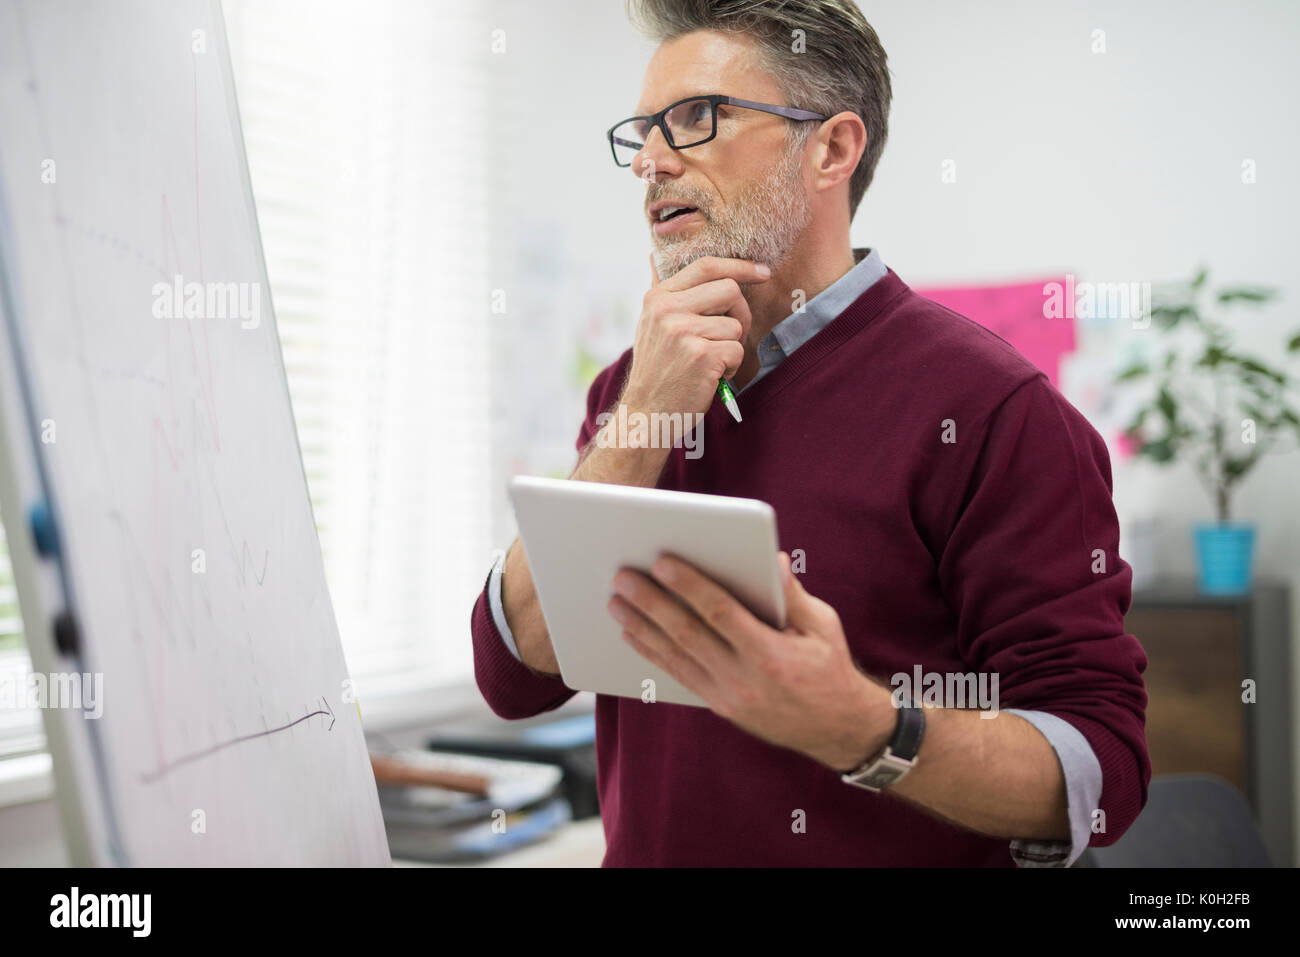 Hardworking man with digital tablet Stock Photo